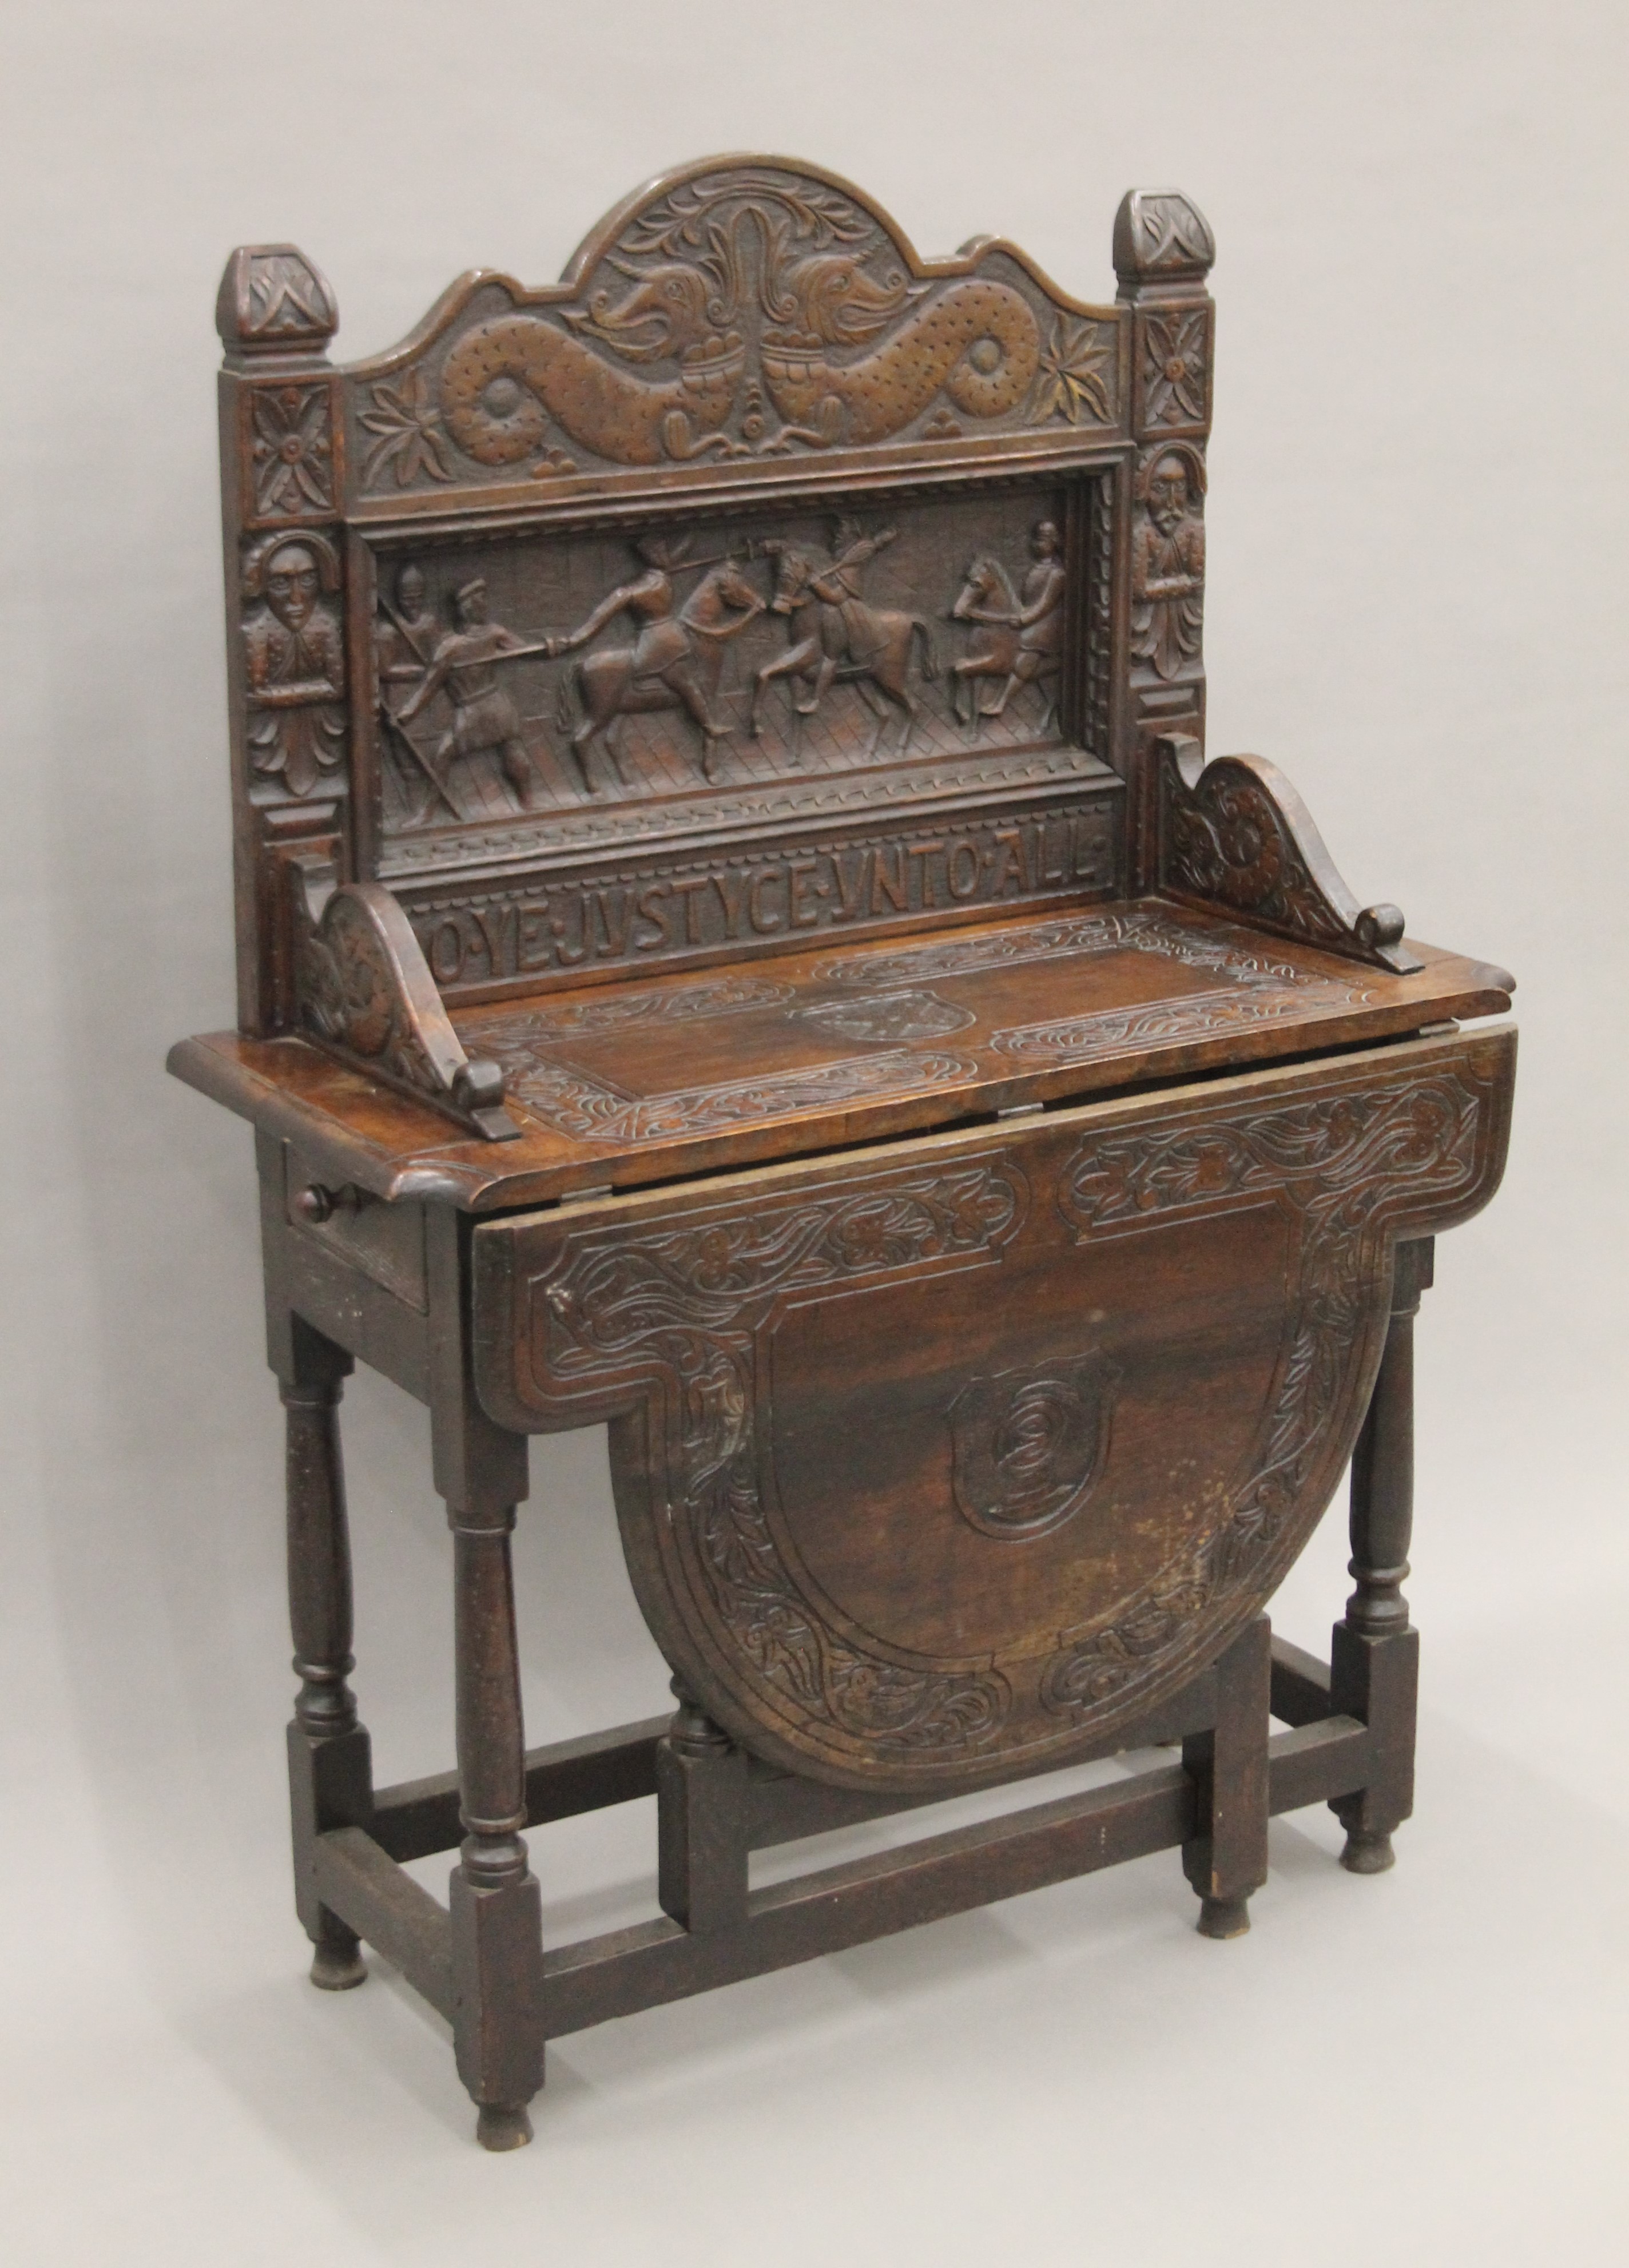 A carved oak single flap side table, the back carved with a scene titled Do Ye Justyce Unto All. - Image 2 of 8